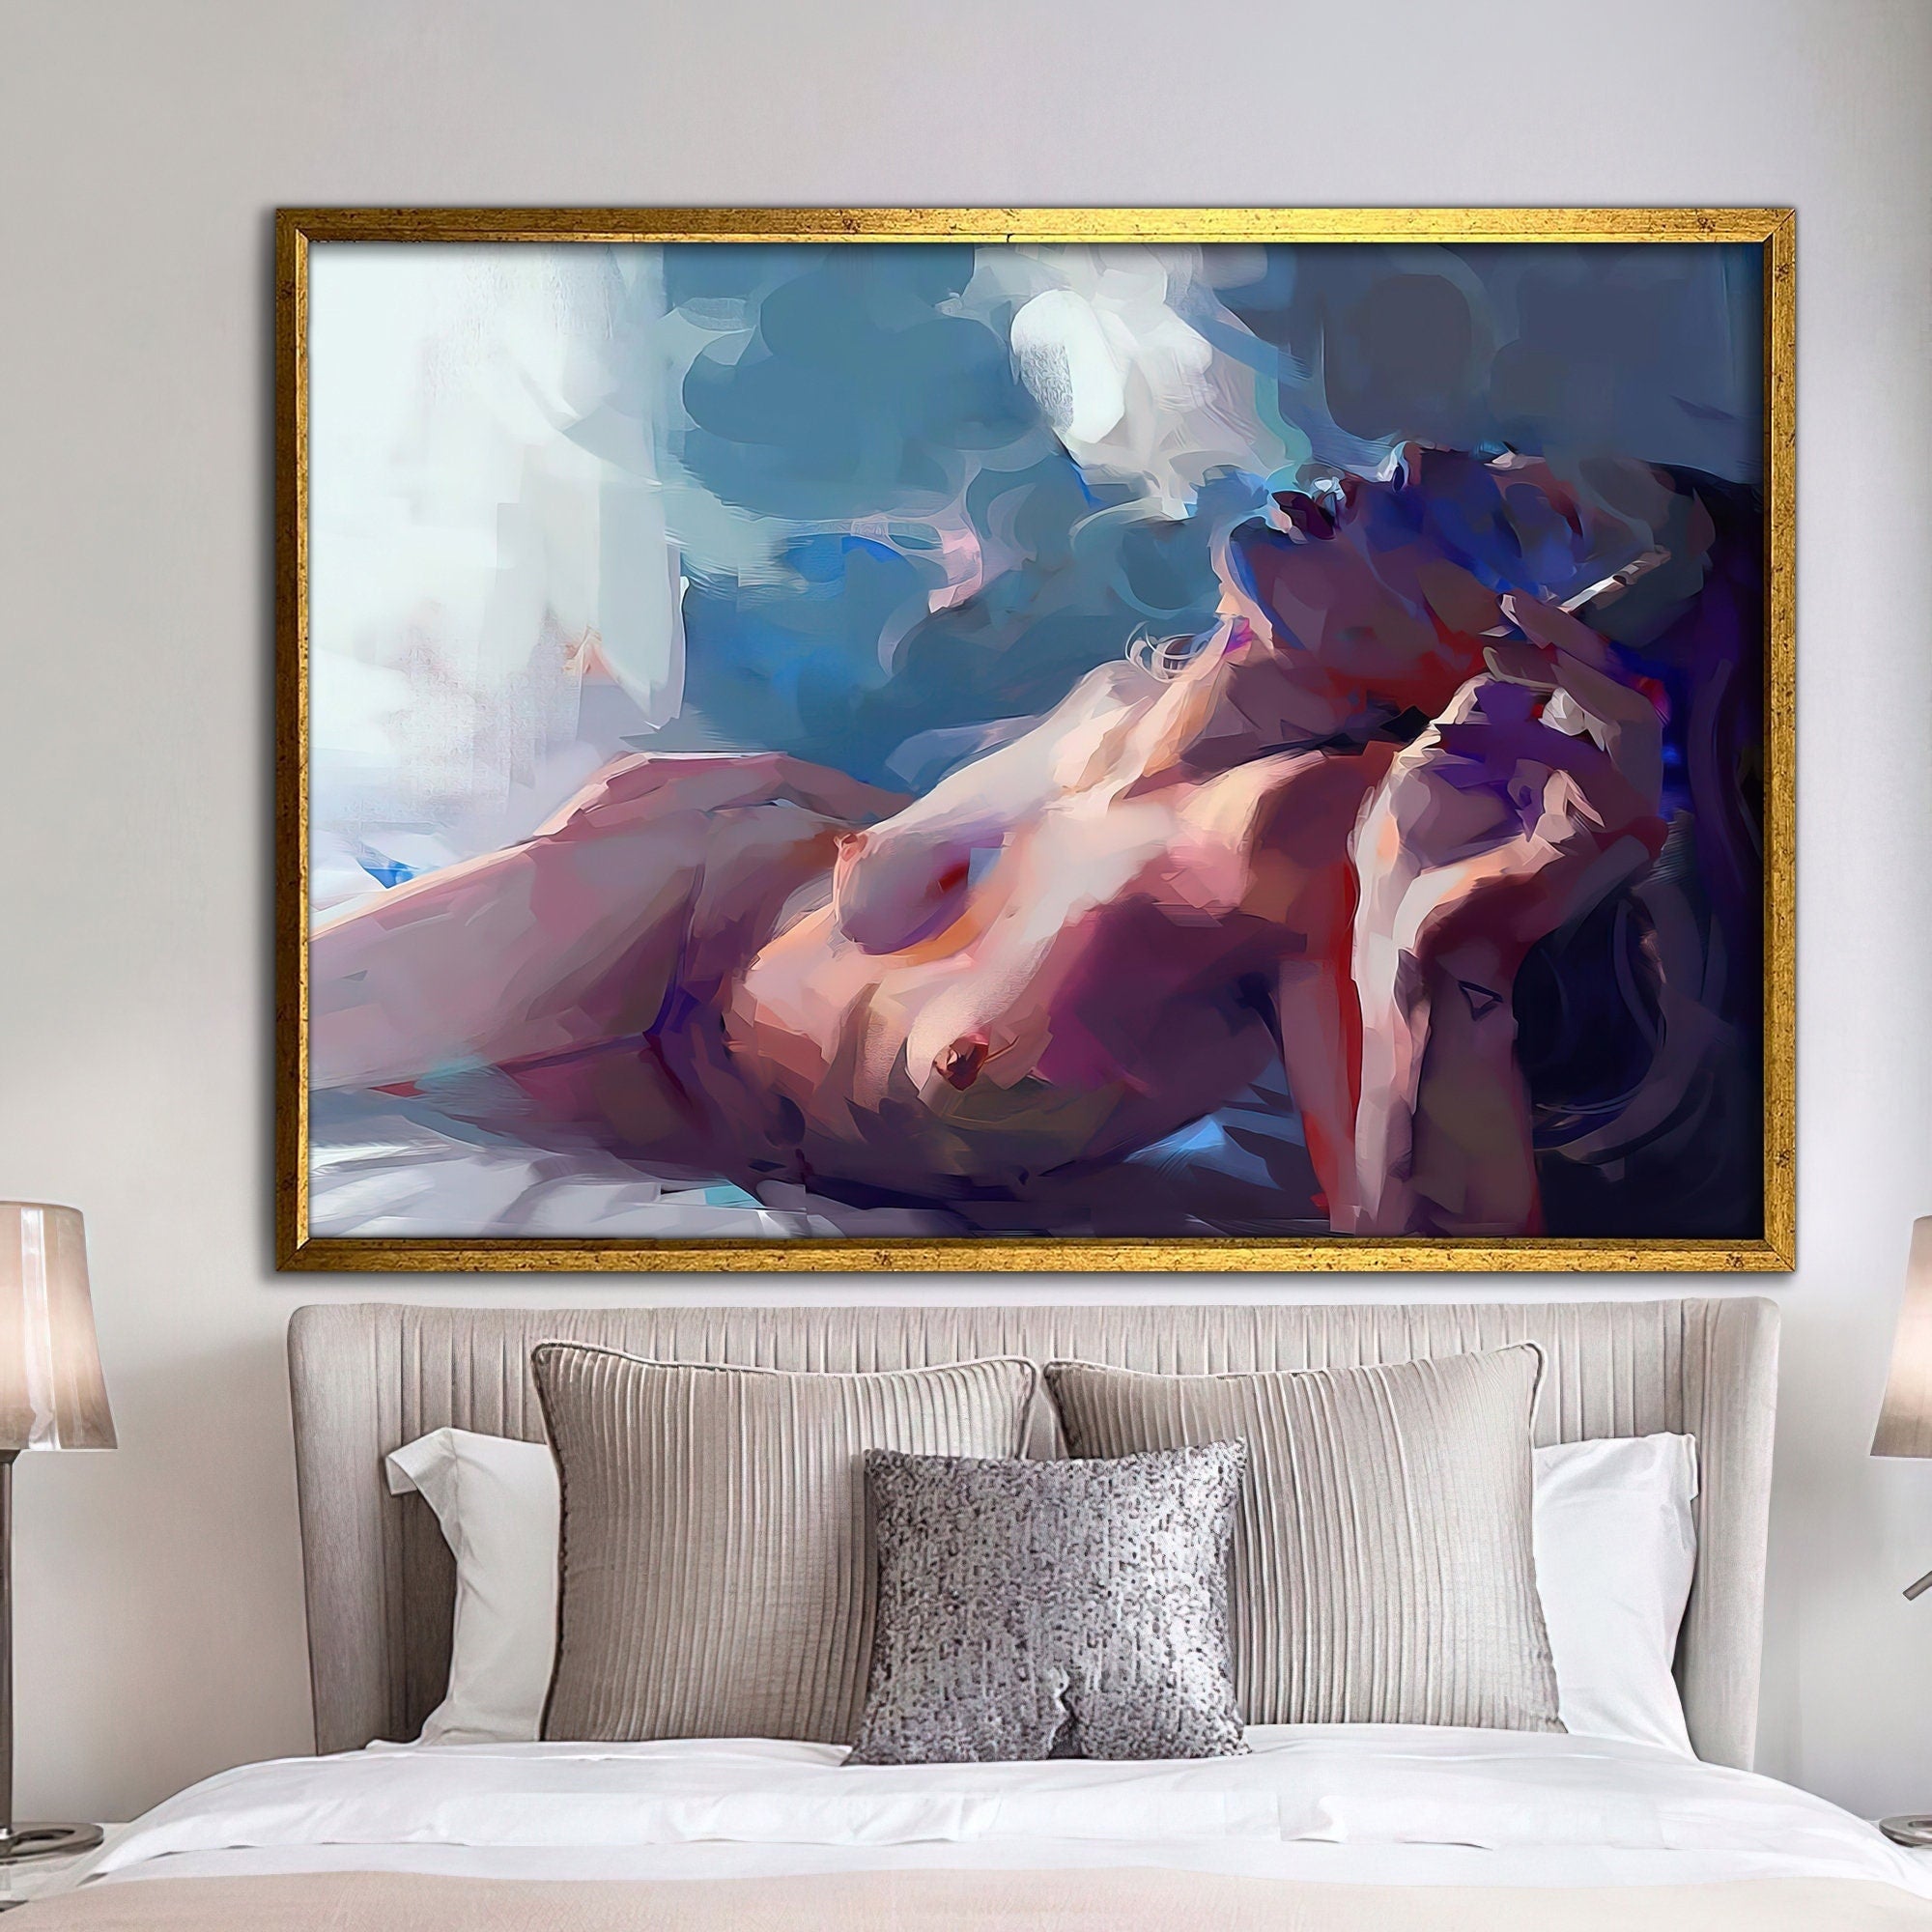 naked woman canvas, smoking woman painting, lying sexy girl print, bedroom decor, erotic home painting, bedroom painting